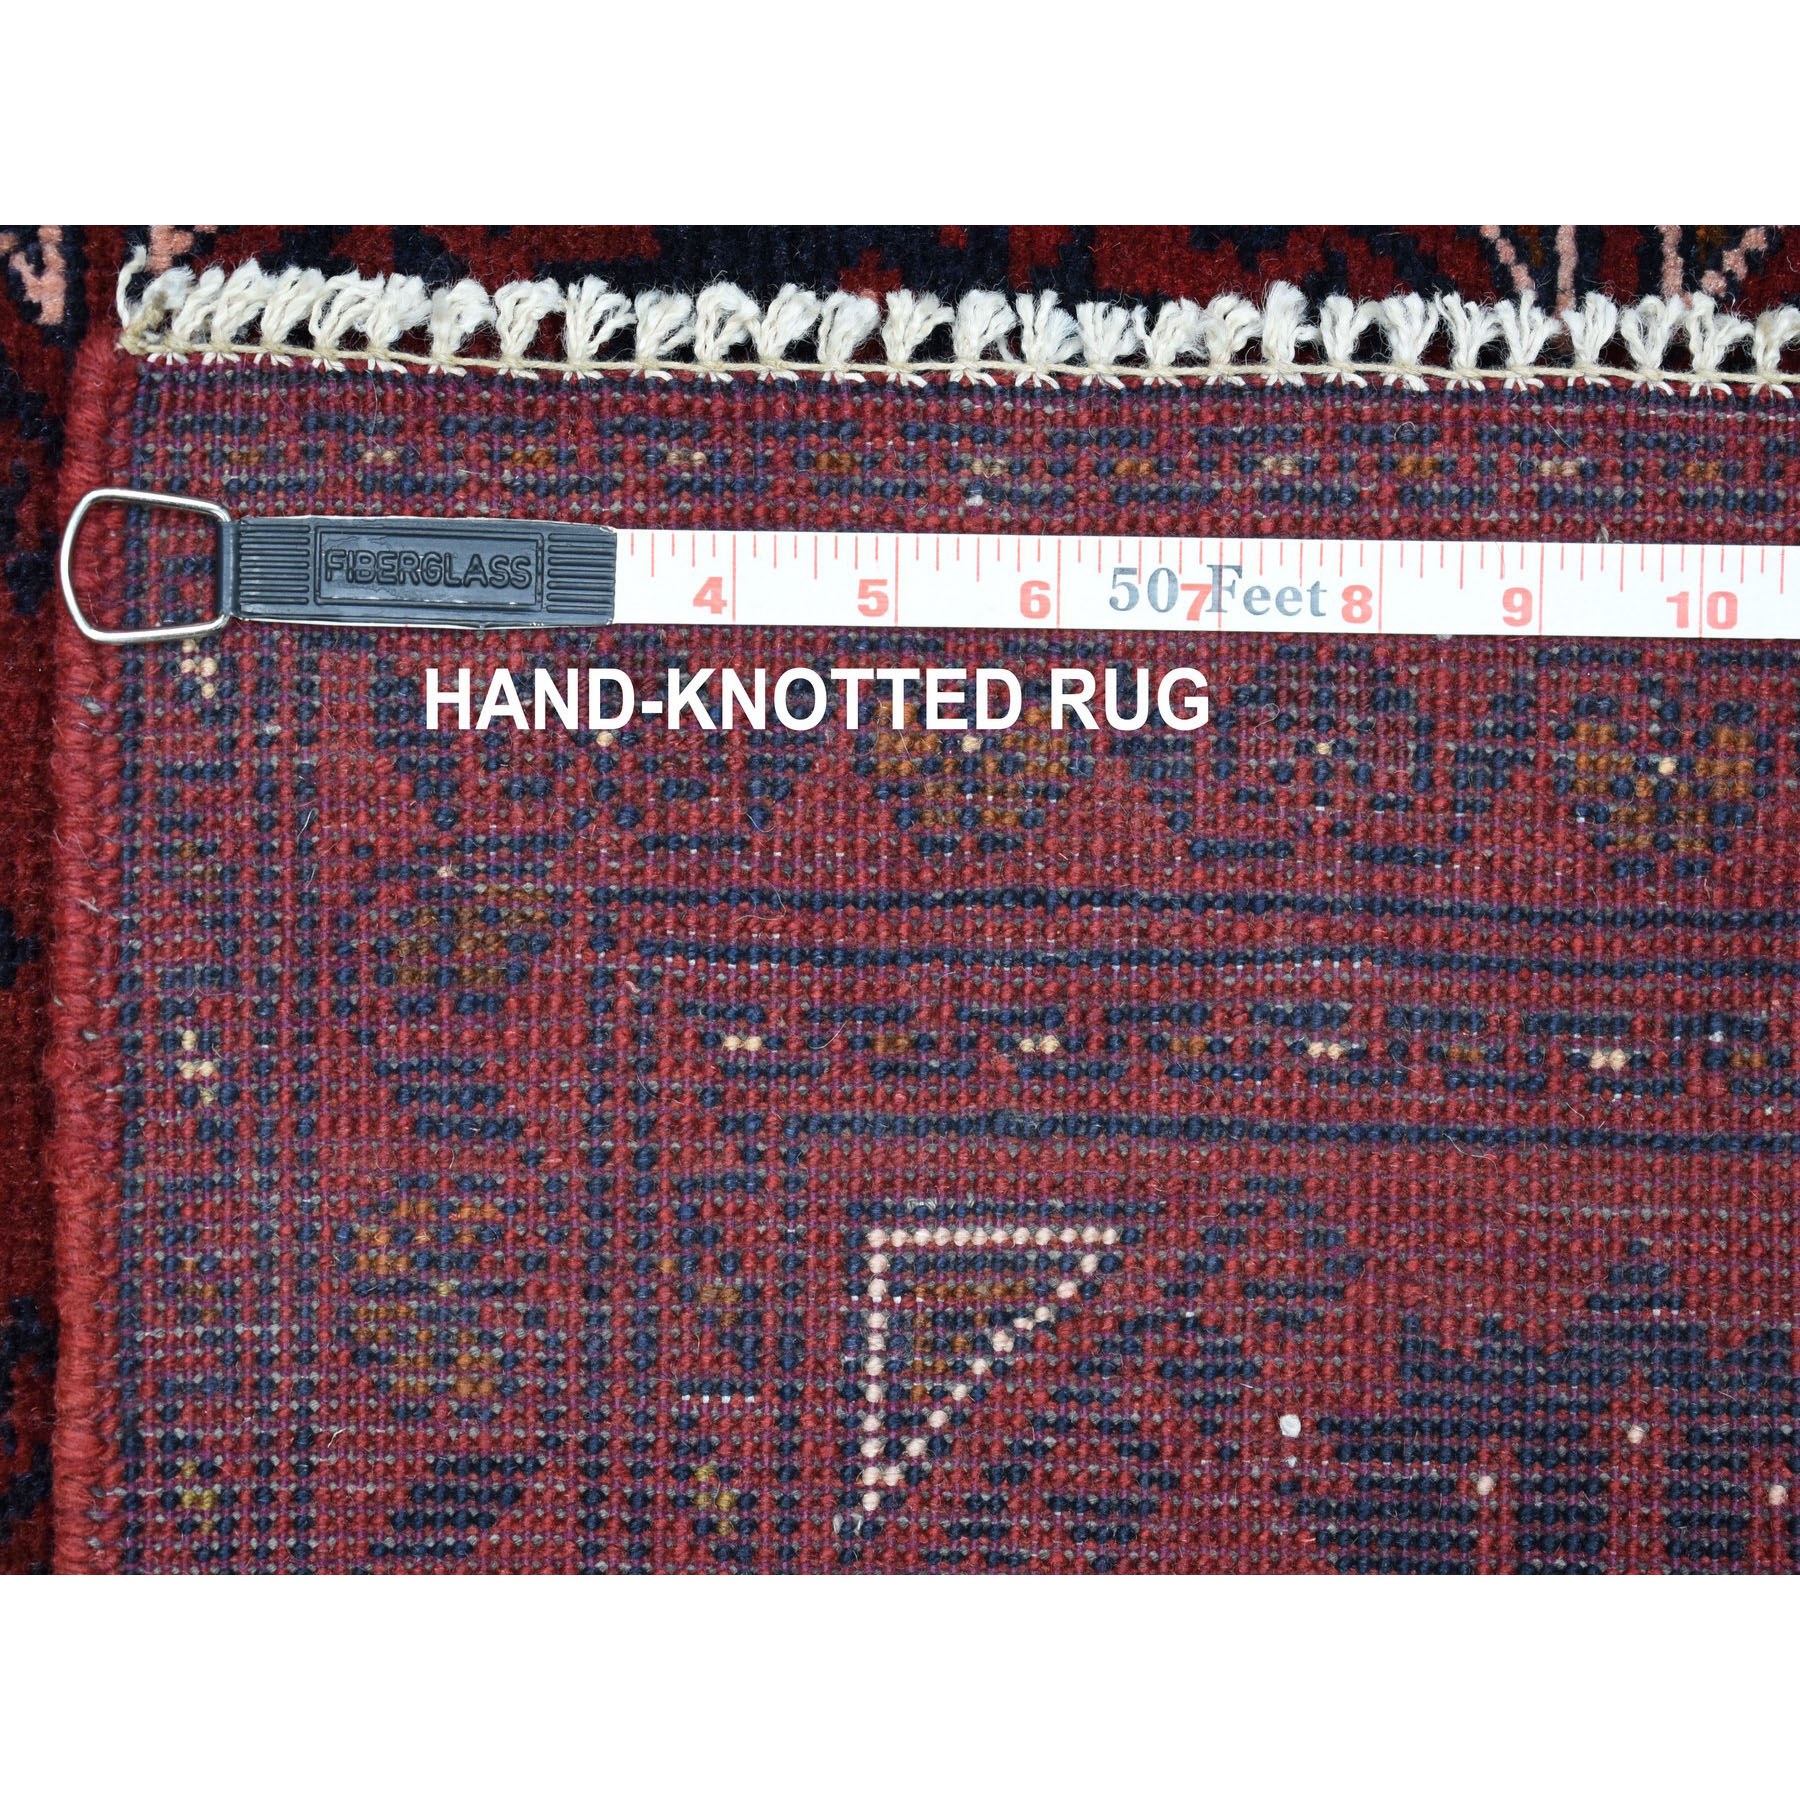 2-6 x4- Deep and Saturated Red Geometric Afghan Andkhoy Pure Wool Hand Knotted Oriental Rug 